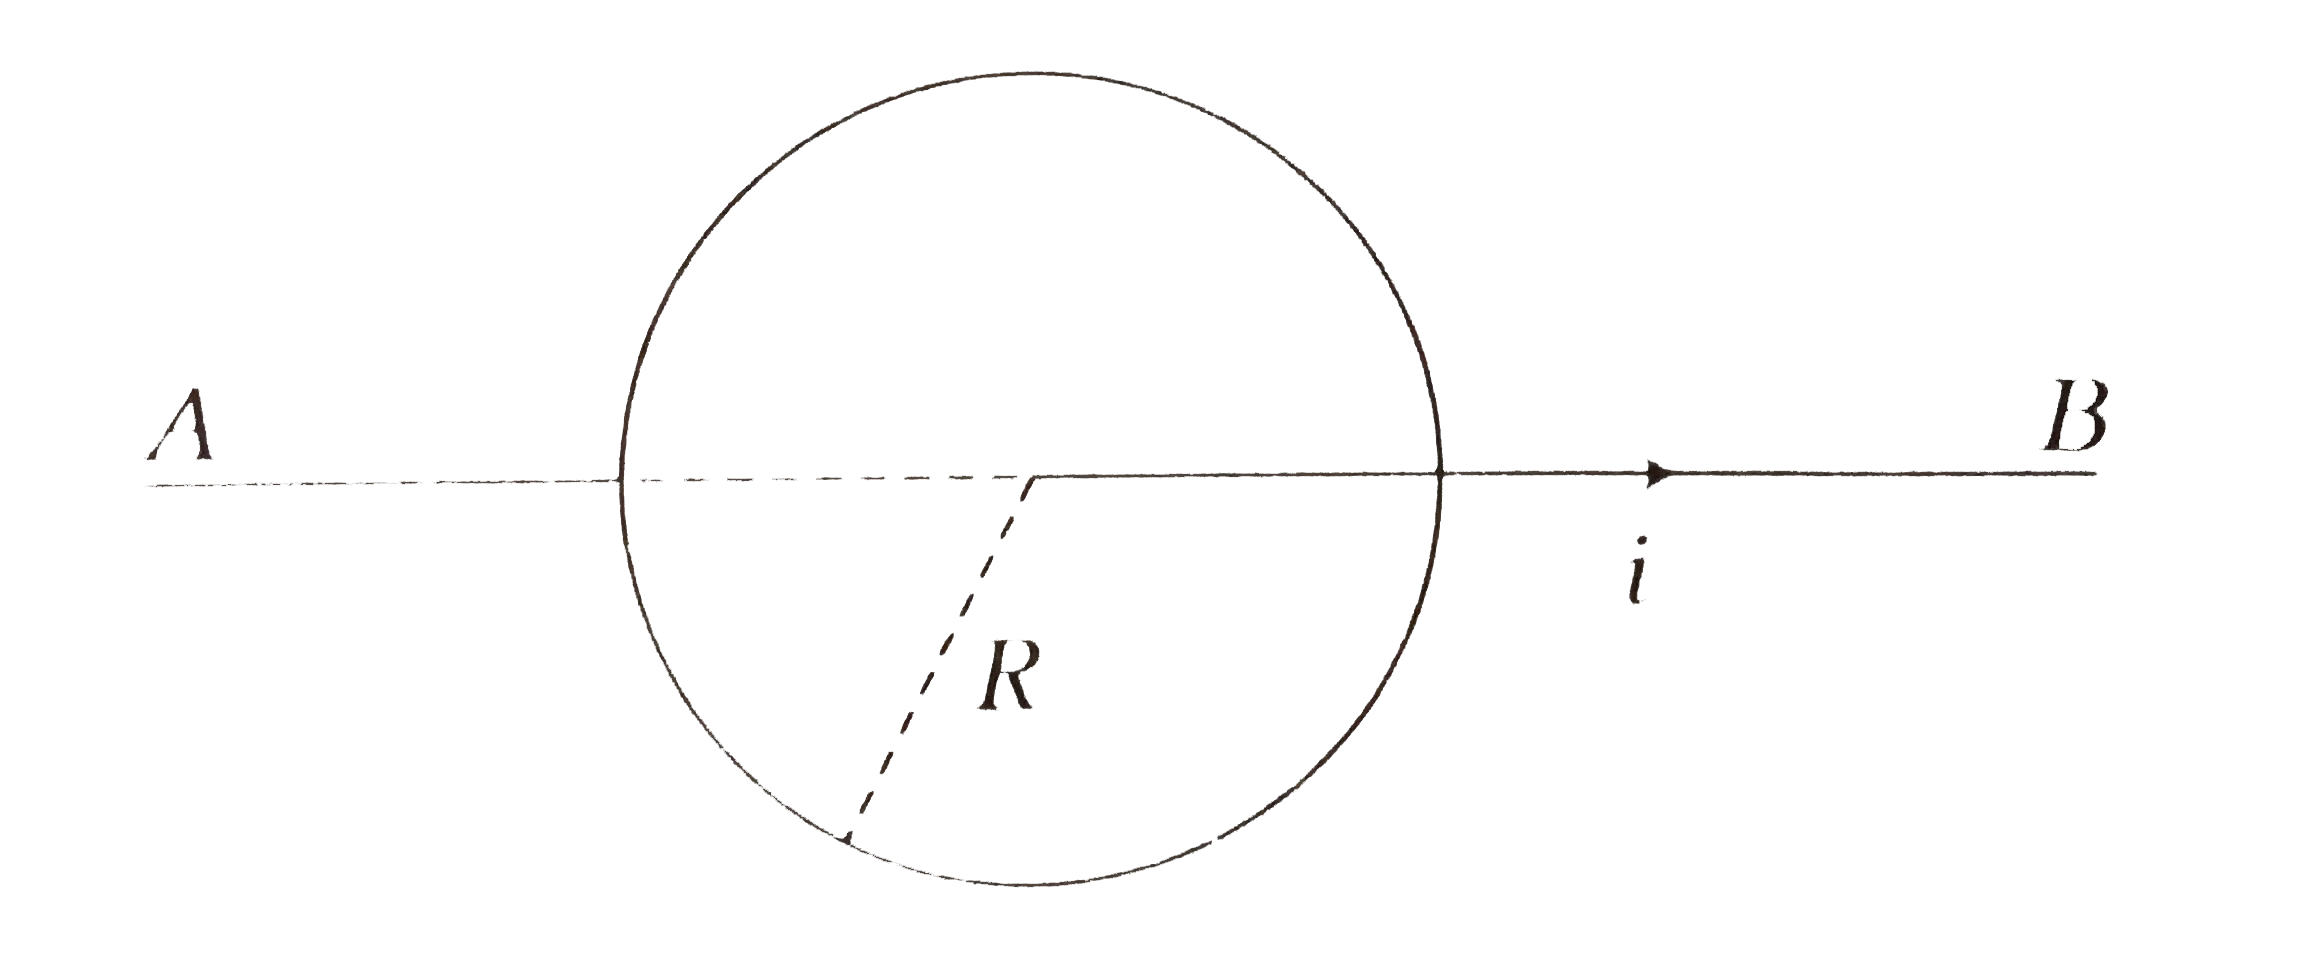 A infinitely long conductor AB lies along the axis of a circular loop of radius R. If the current in the conductor AB varies at the rate of x ampere/second, then the induced emf in the loop is